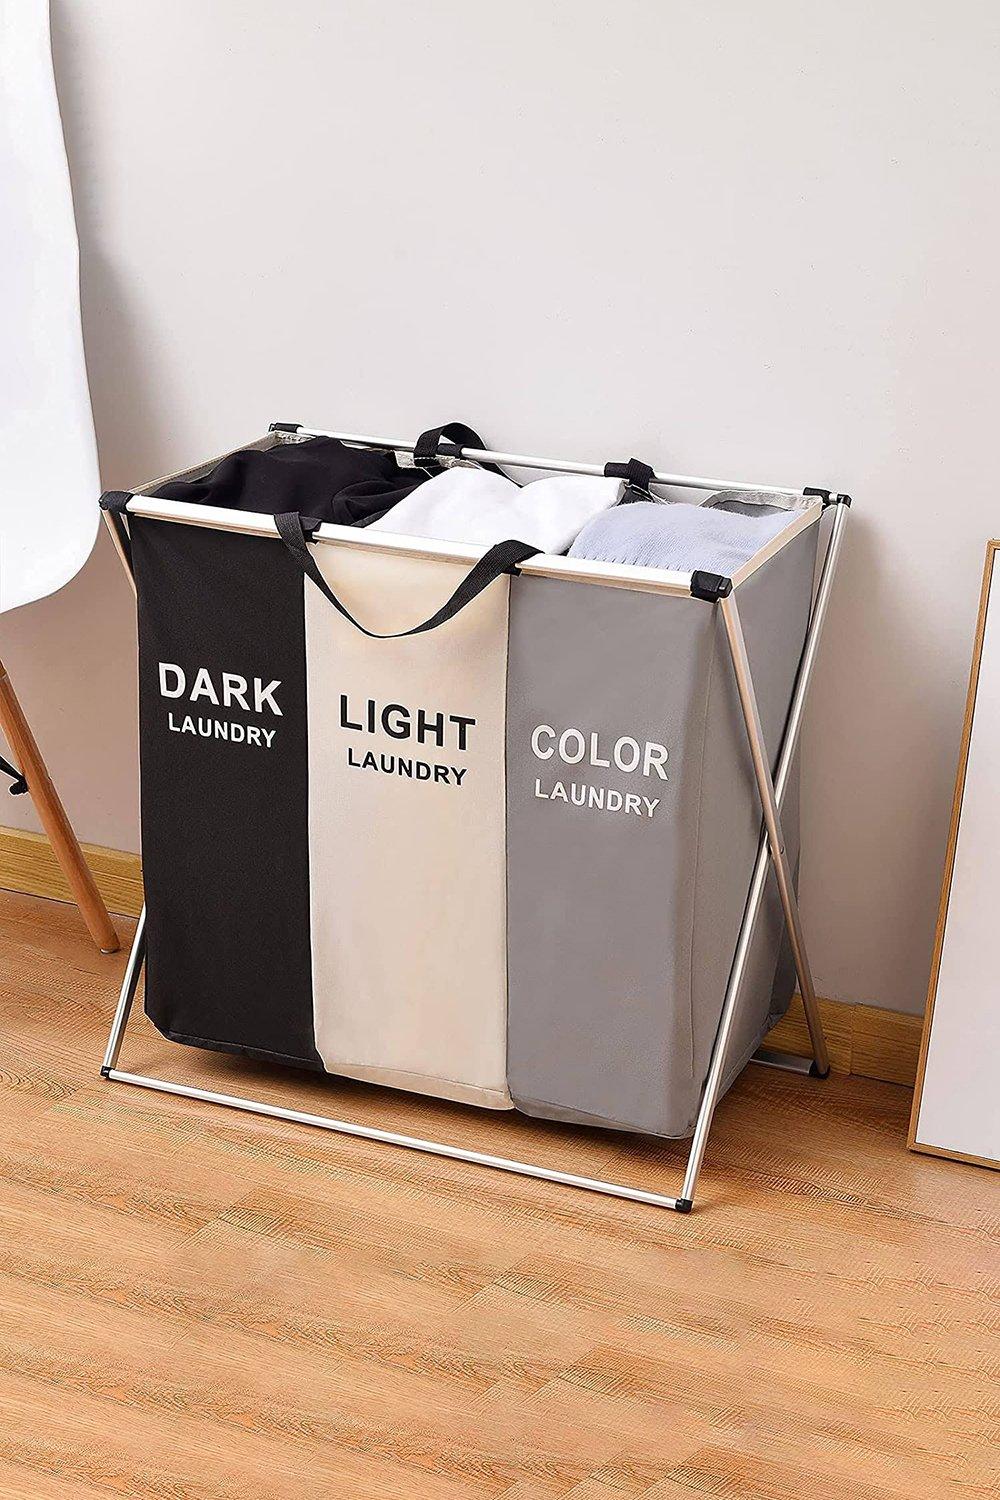 3 Compartment Foldable Laundry Basket Large Detachable Sorter Hamper with Carry Handle